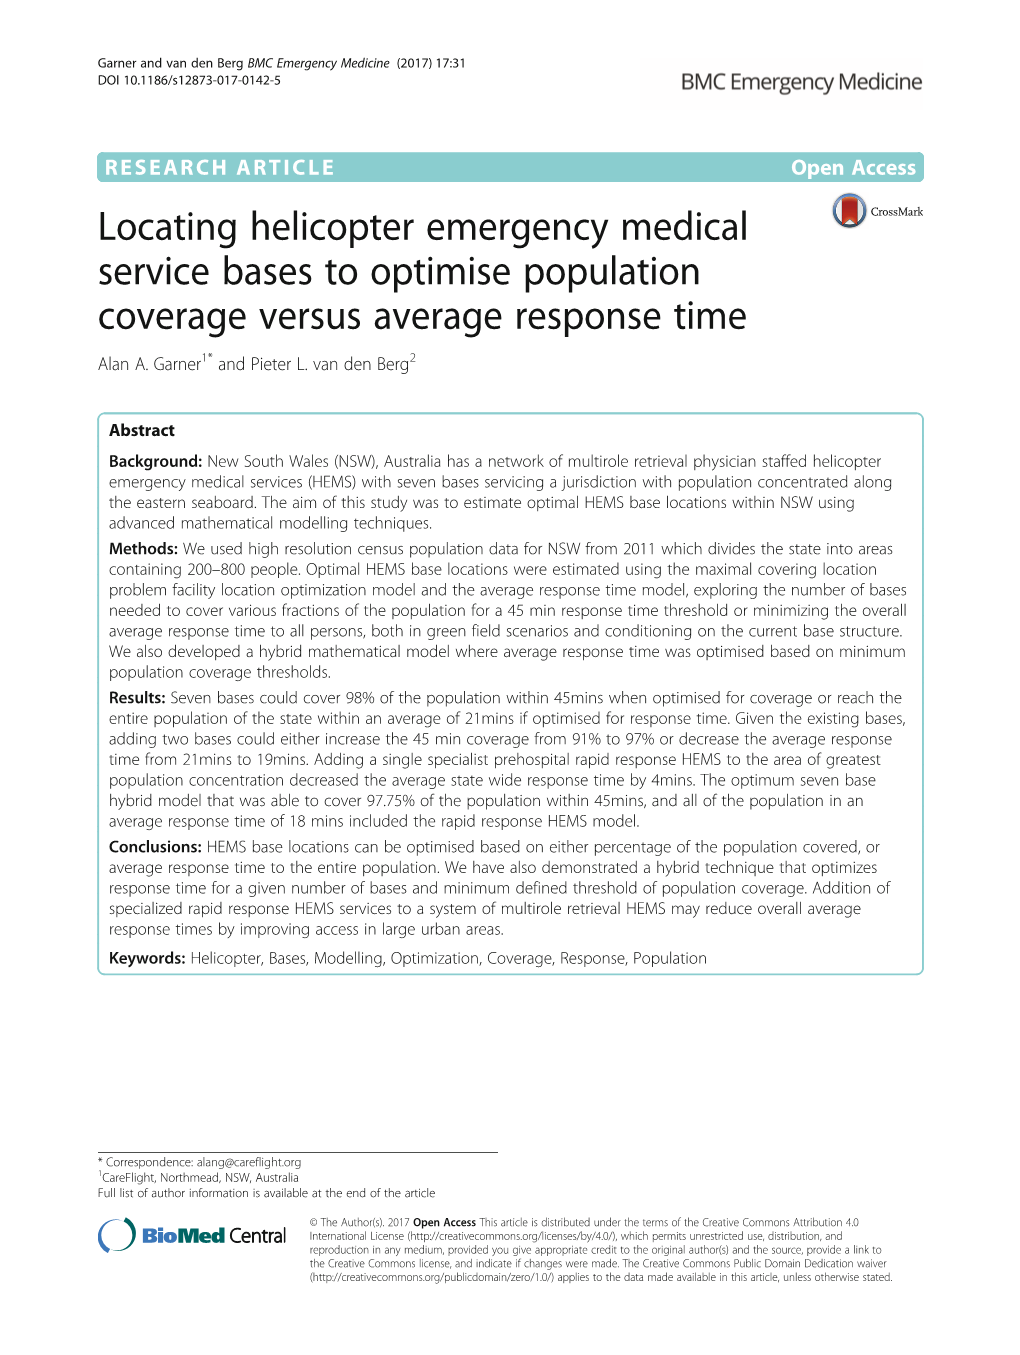 Locating Helicopter Emergency Medical Service Bases to Optimise Population Coverage Versus Average Response Time Alan A